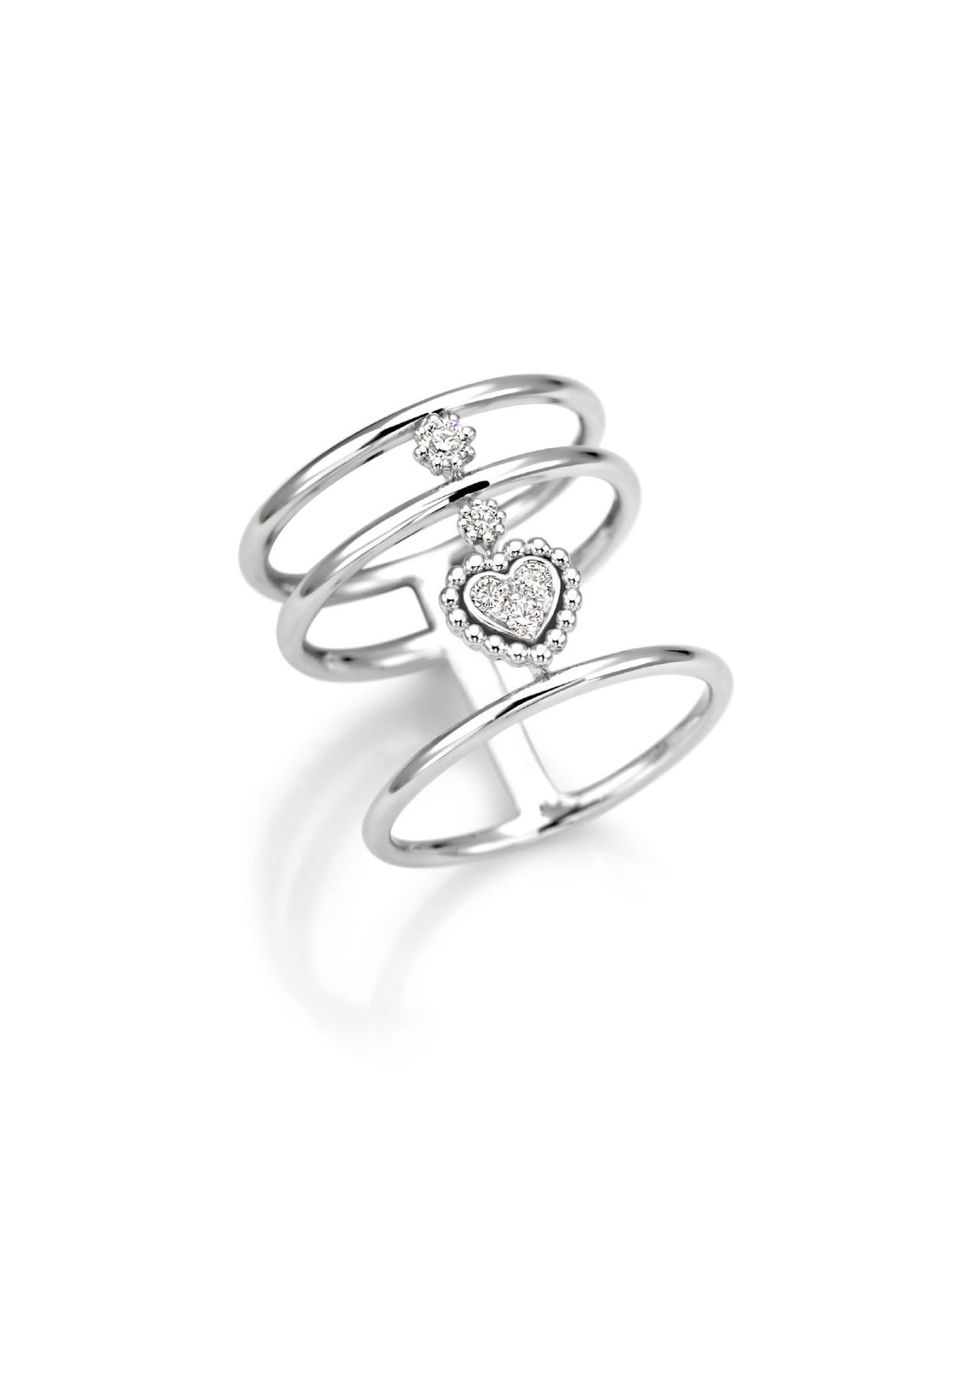 Platinum, Body jewelry, Jewellery, Fashion accessory, Ring, Metal, Silver, Engagement ring, Pre-engagement ring, Mineral, 